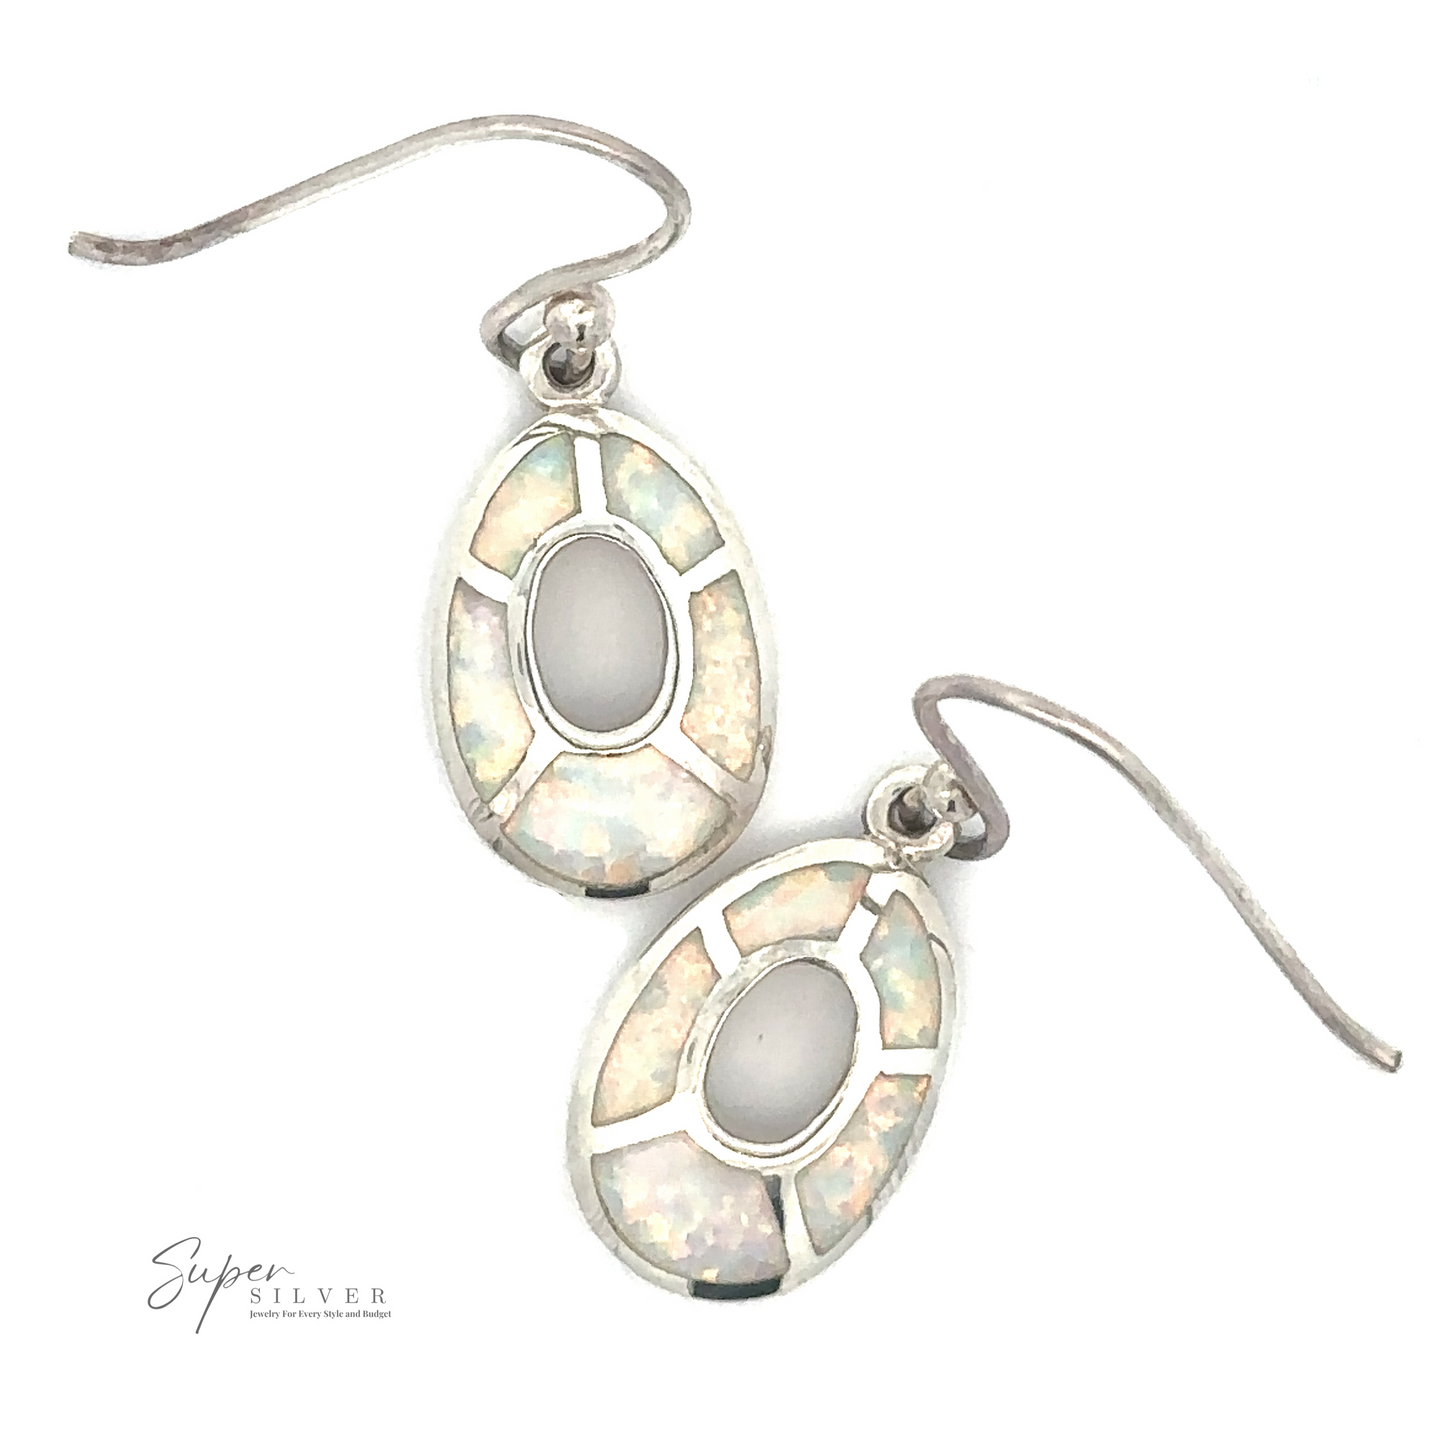 
                  
                    A pair of Small Drop Shape Dangle Earrings, sterling silver with a lab-created opal inlay design, featuring hooks for wearing. The tag "Super Silver" is visible in the corner.
                  
                